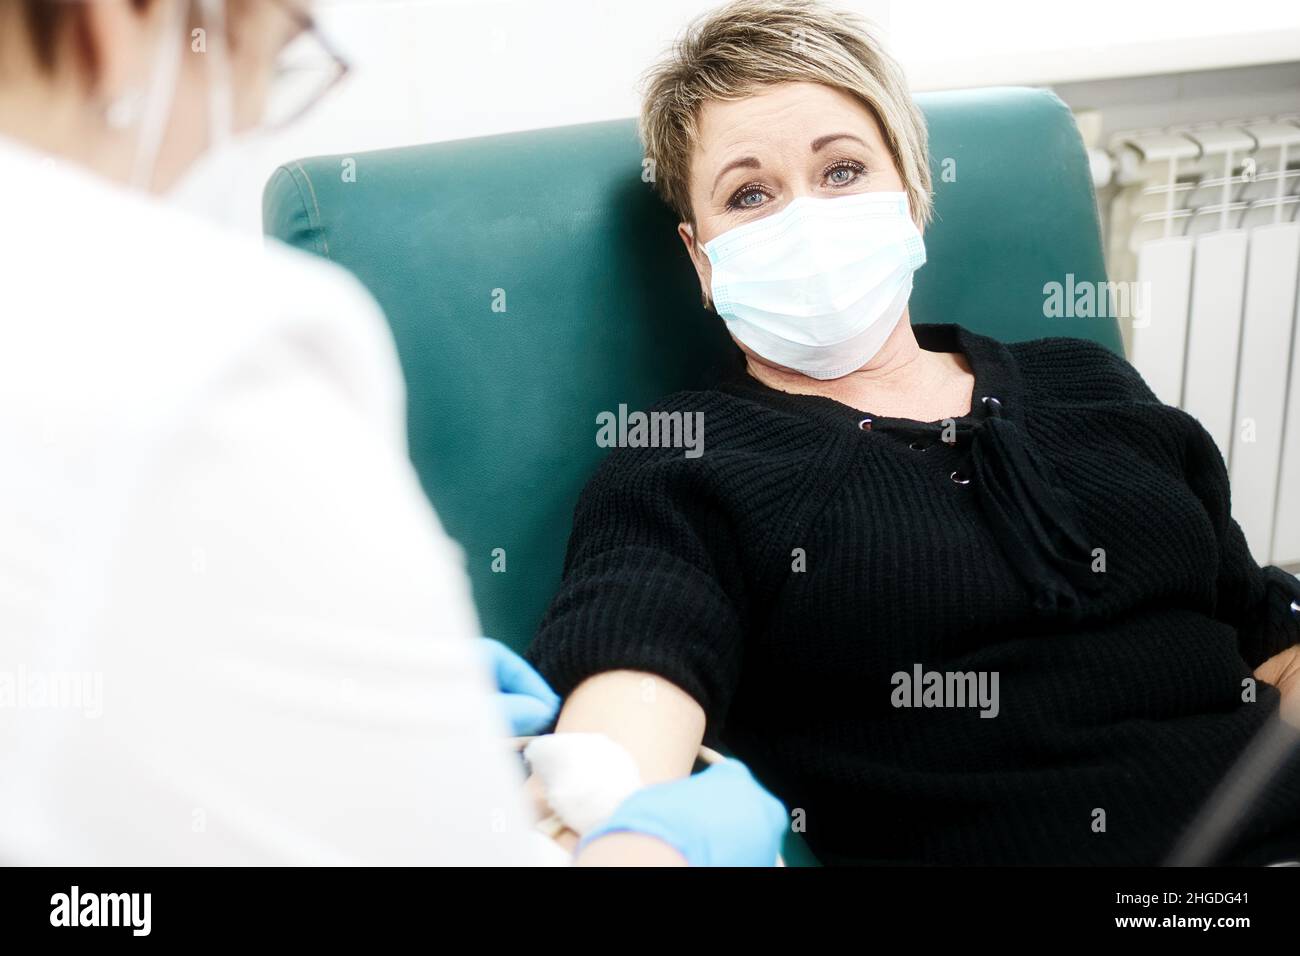 Rehabilitation and treatment in medical clinic. 40-50 year old woman in medical mask sits in chair and looks into camera. Nurse injects woman into vein. Stock Photo